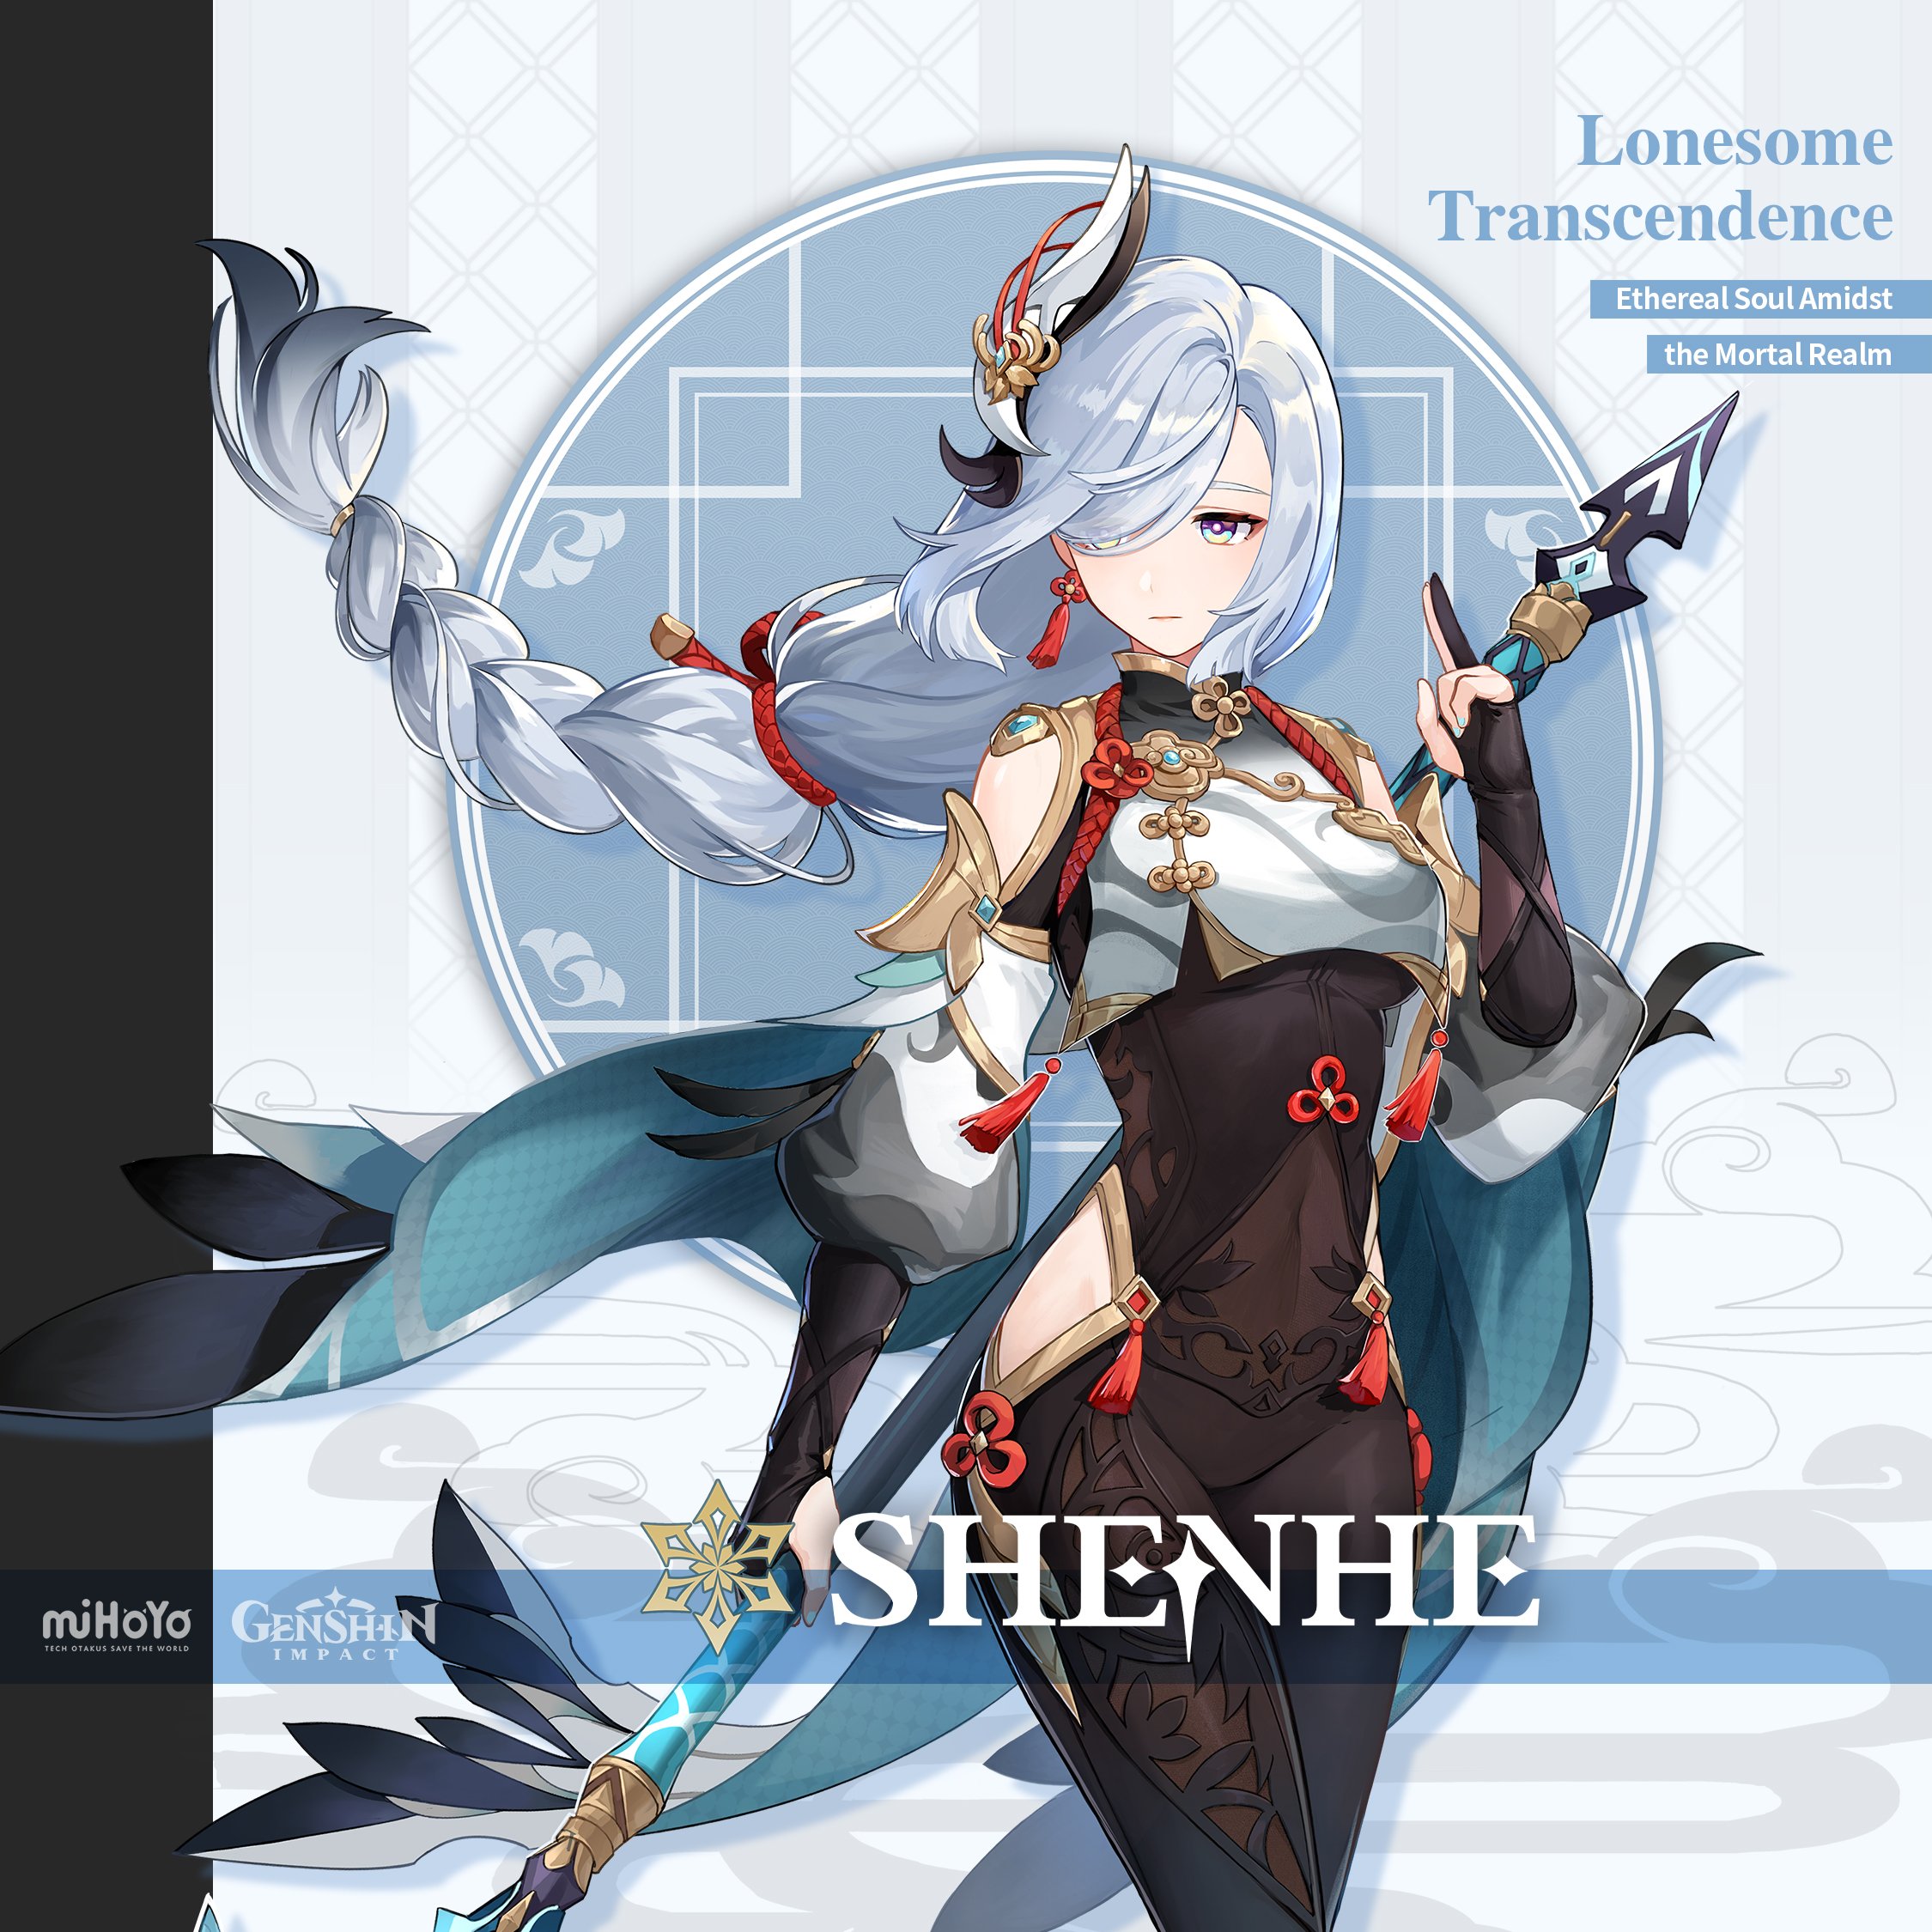 Genshin Impact ‧ Lonesome Transcendence Ethereal Soul Amidst the Mortal Realm Shenhe comes from a branch family of a clan of exorcists. Due to certain reasons, Cloud Retainer took